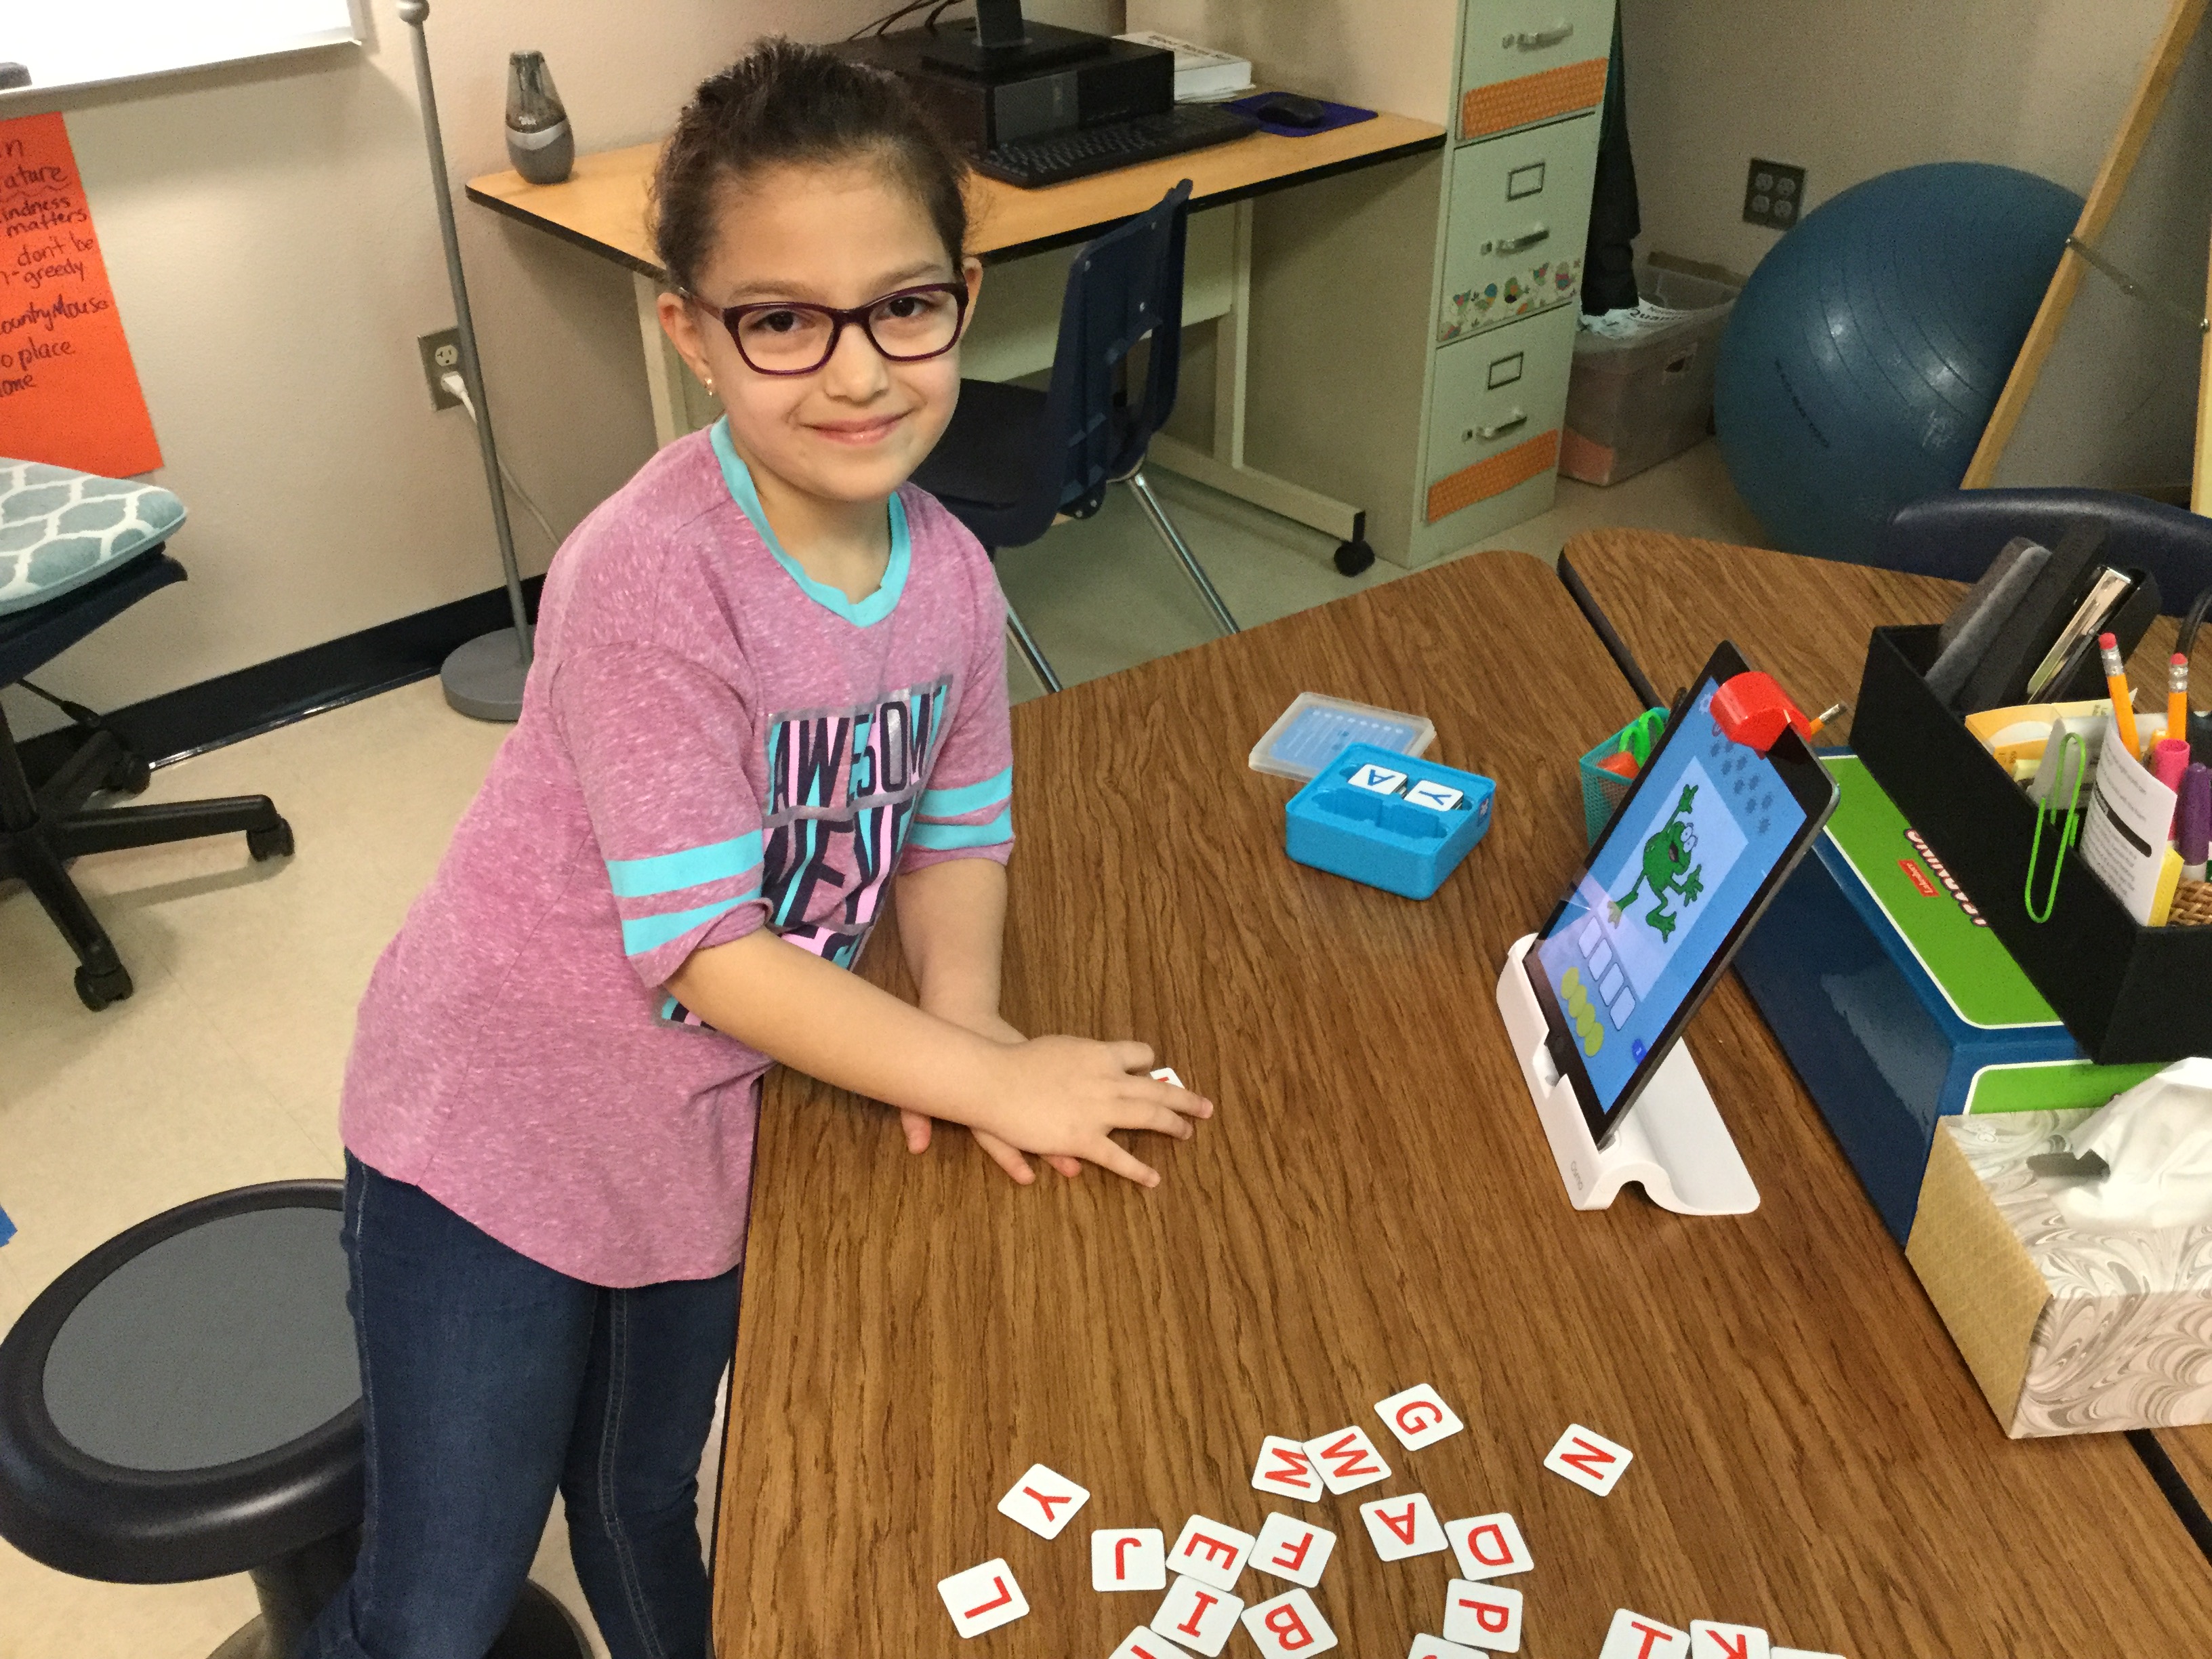 CRES Osmo in Ms. Hyden’s Class!